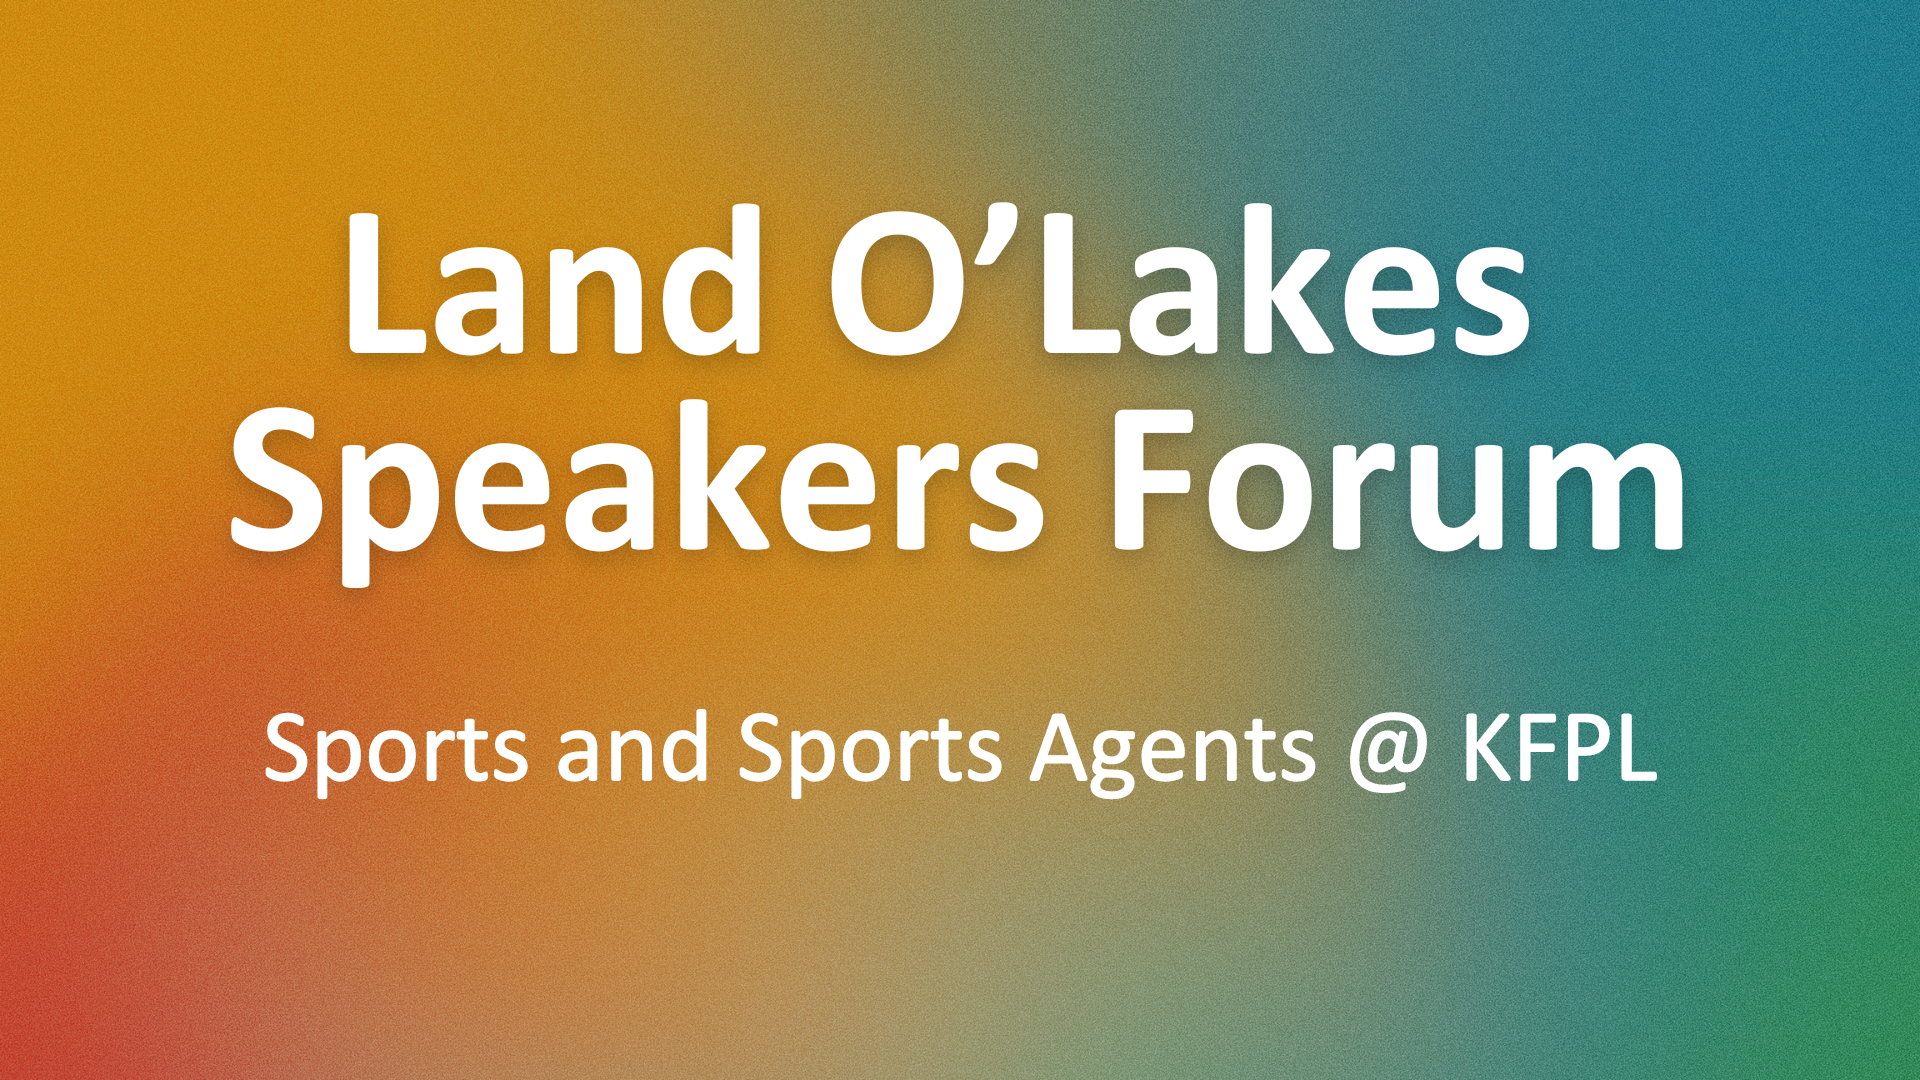 Land O' Lakes Speakers Forum: Sports and sports agents